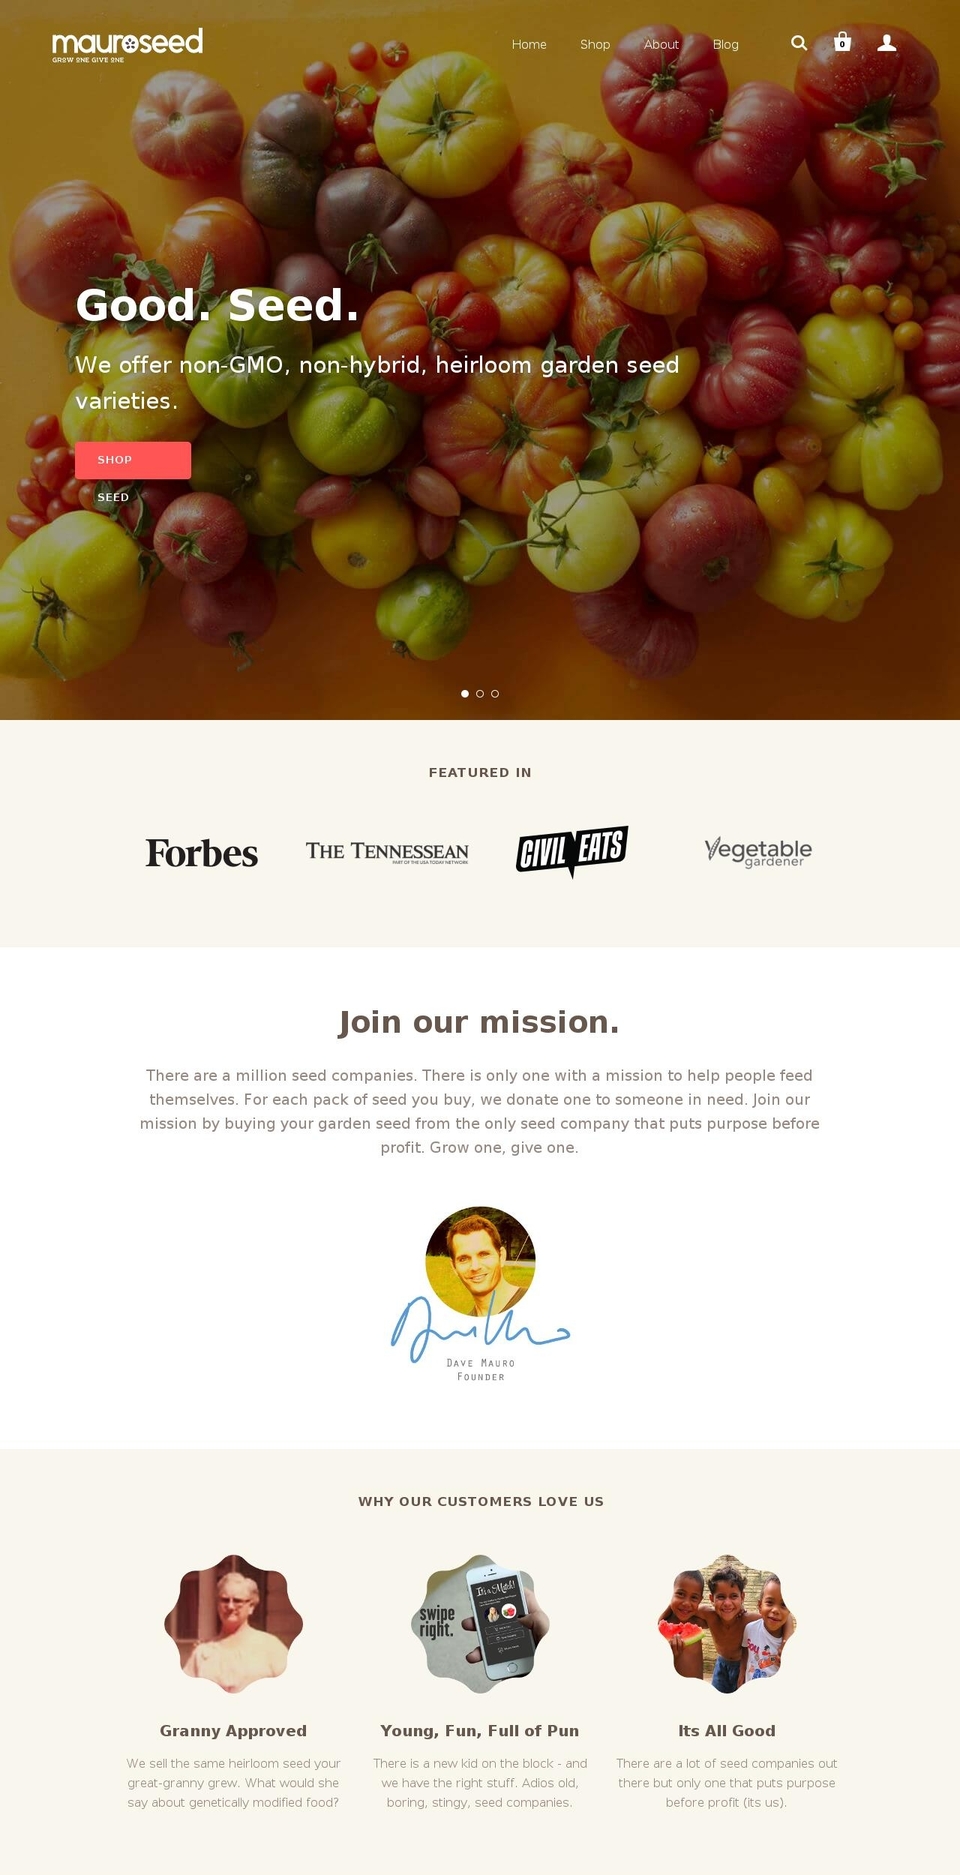 Story Shopify theme site example mauroseed.com